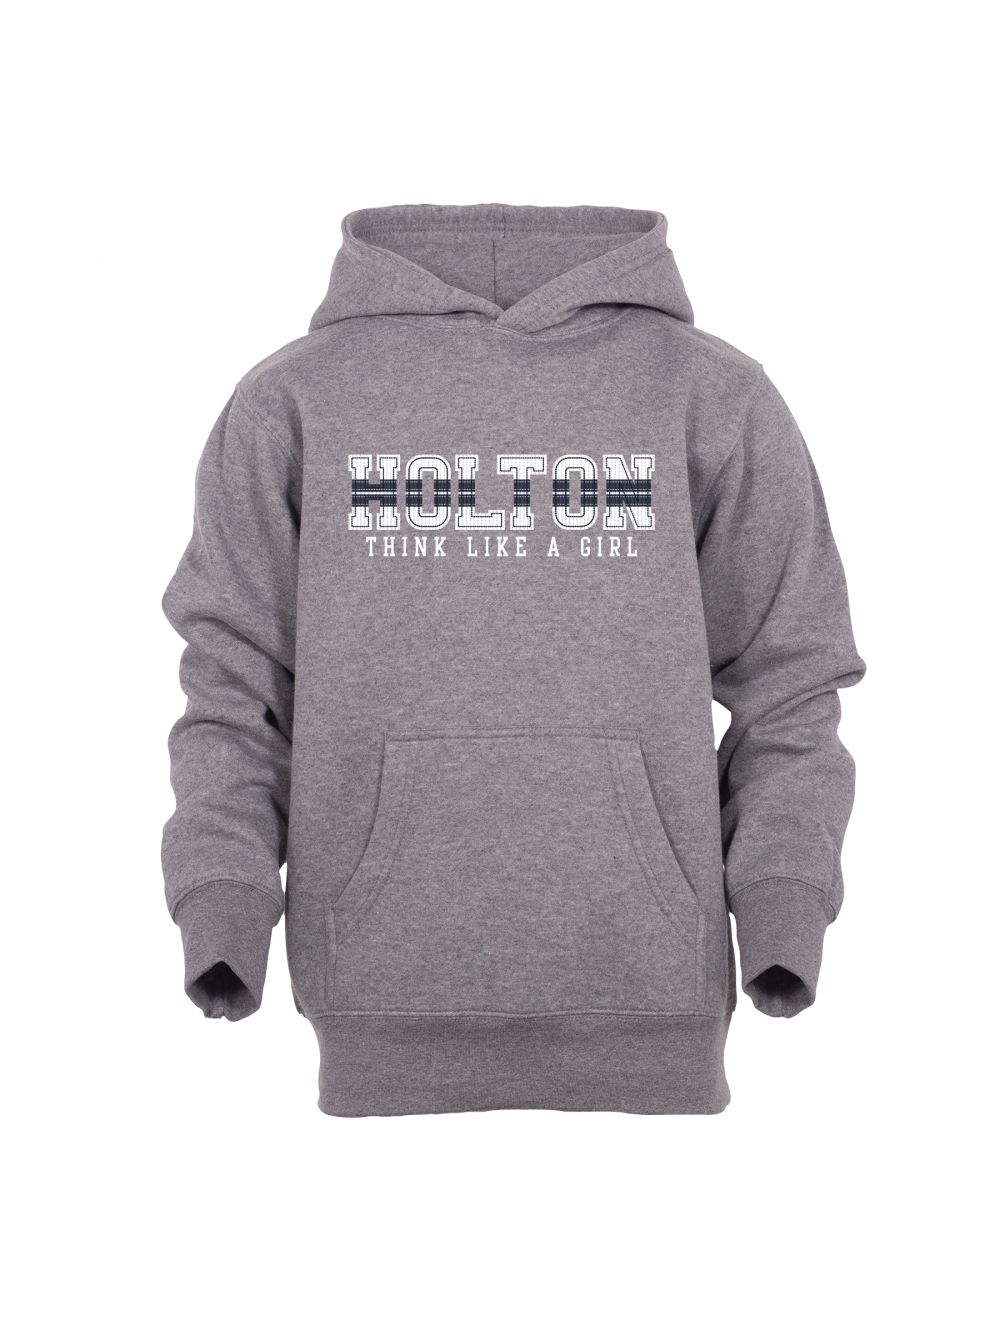 Holton-Arms School Store YOUTH HOODIE GREY PLAID